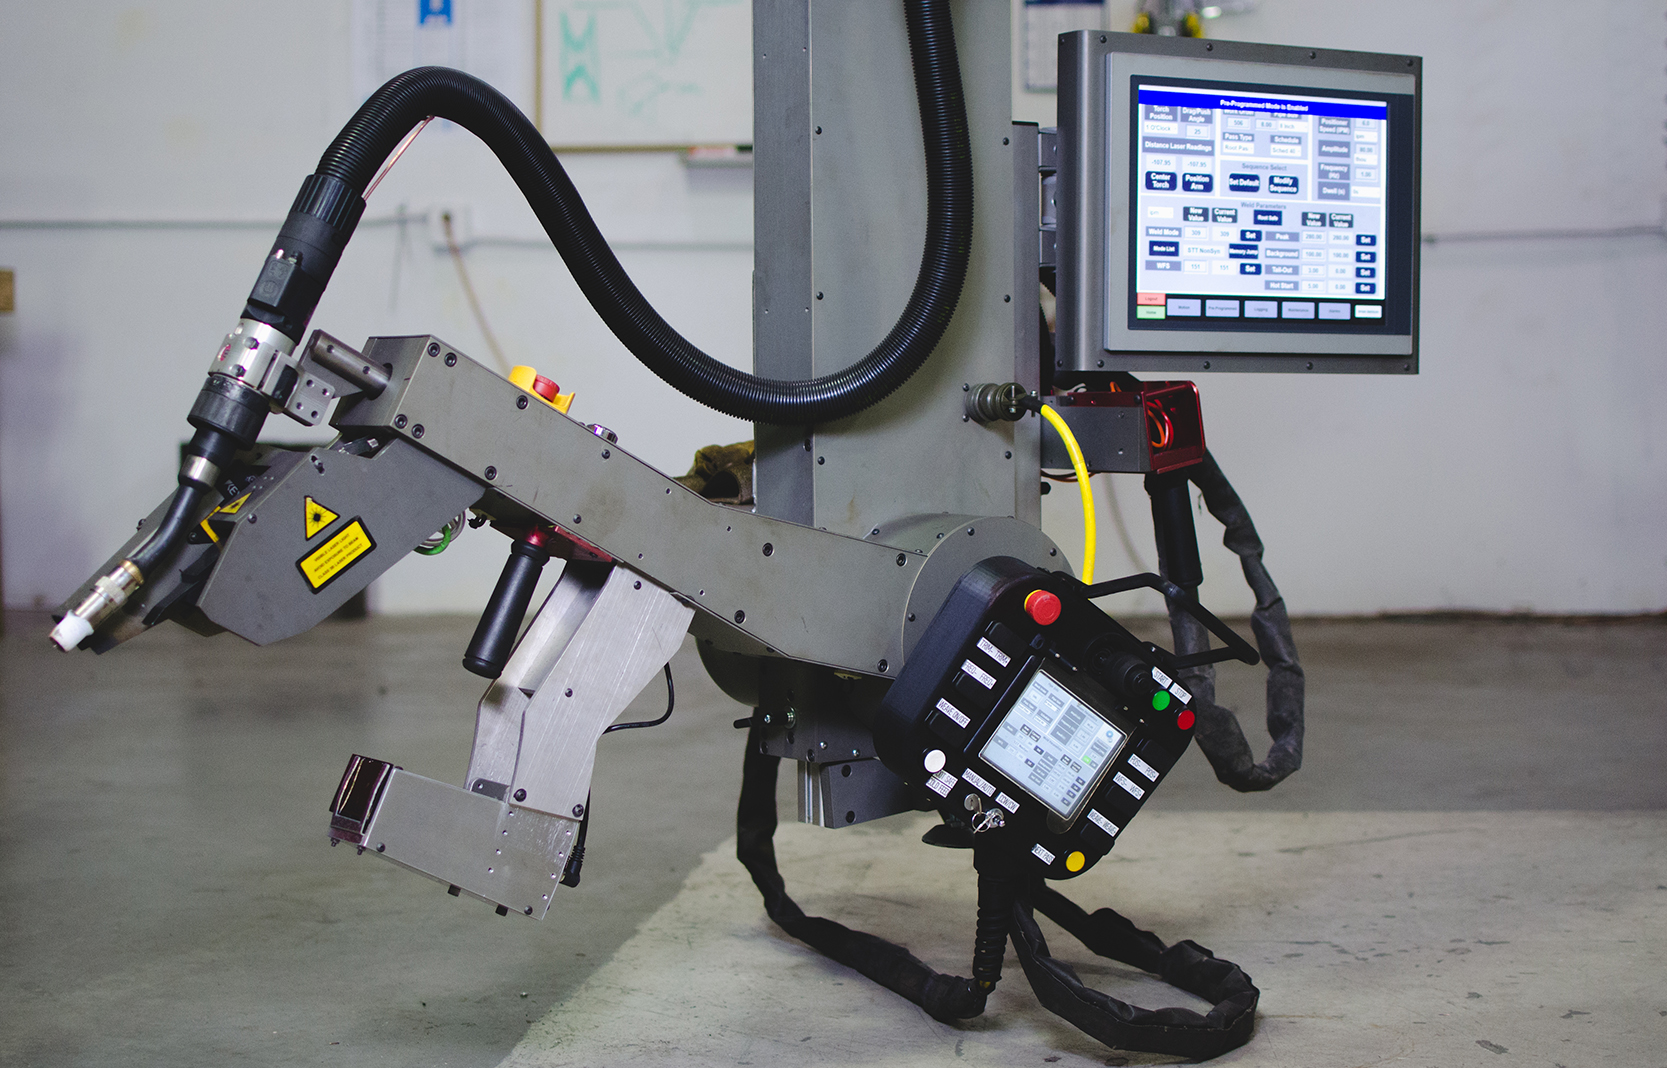 Novarc’s Collaborative Robot Solution for Welders and the Environment